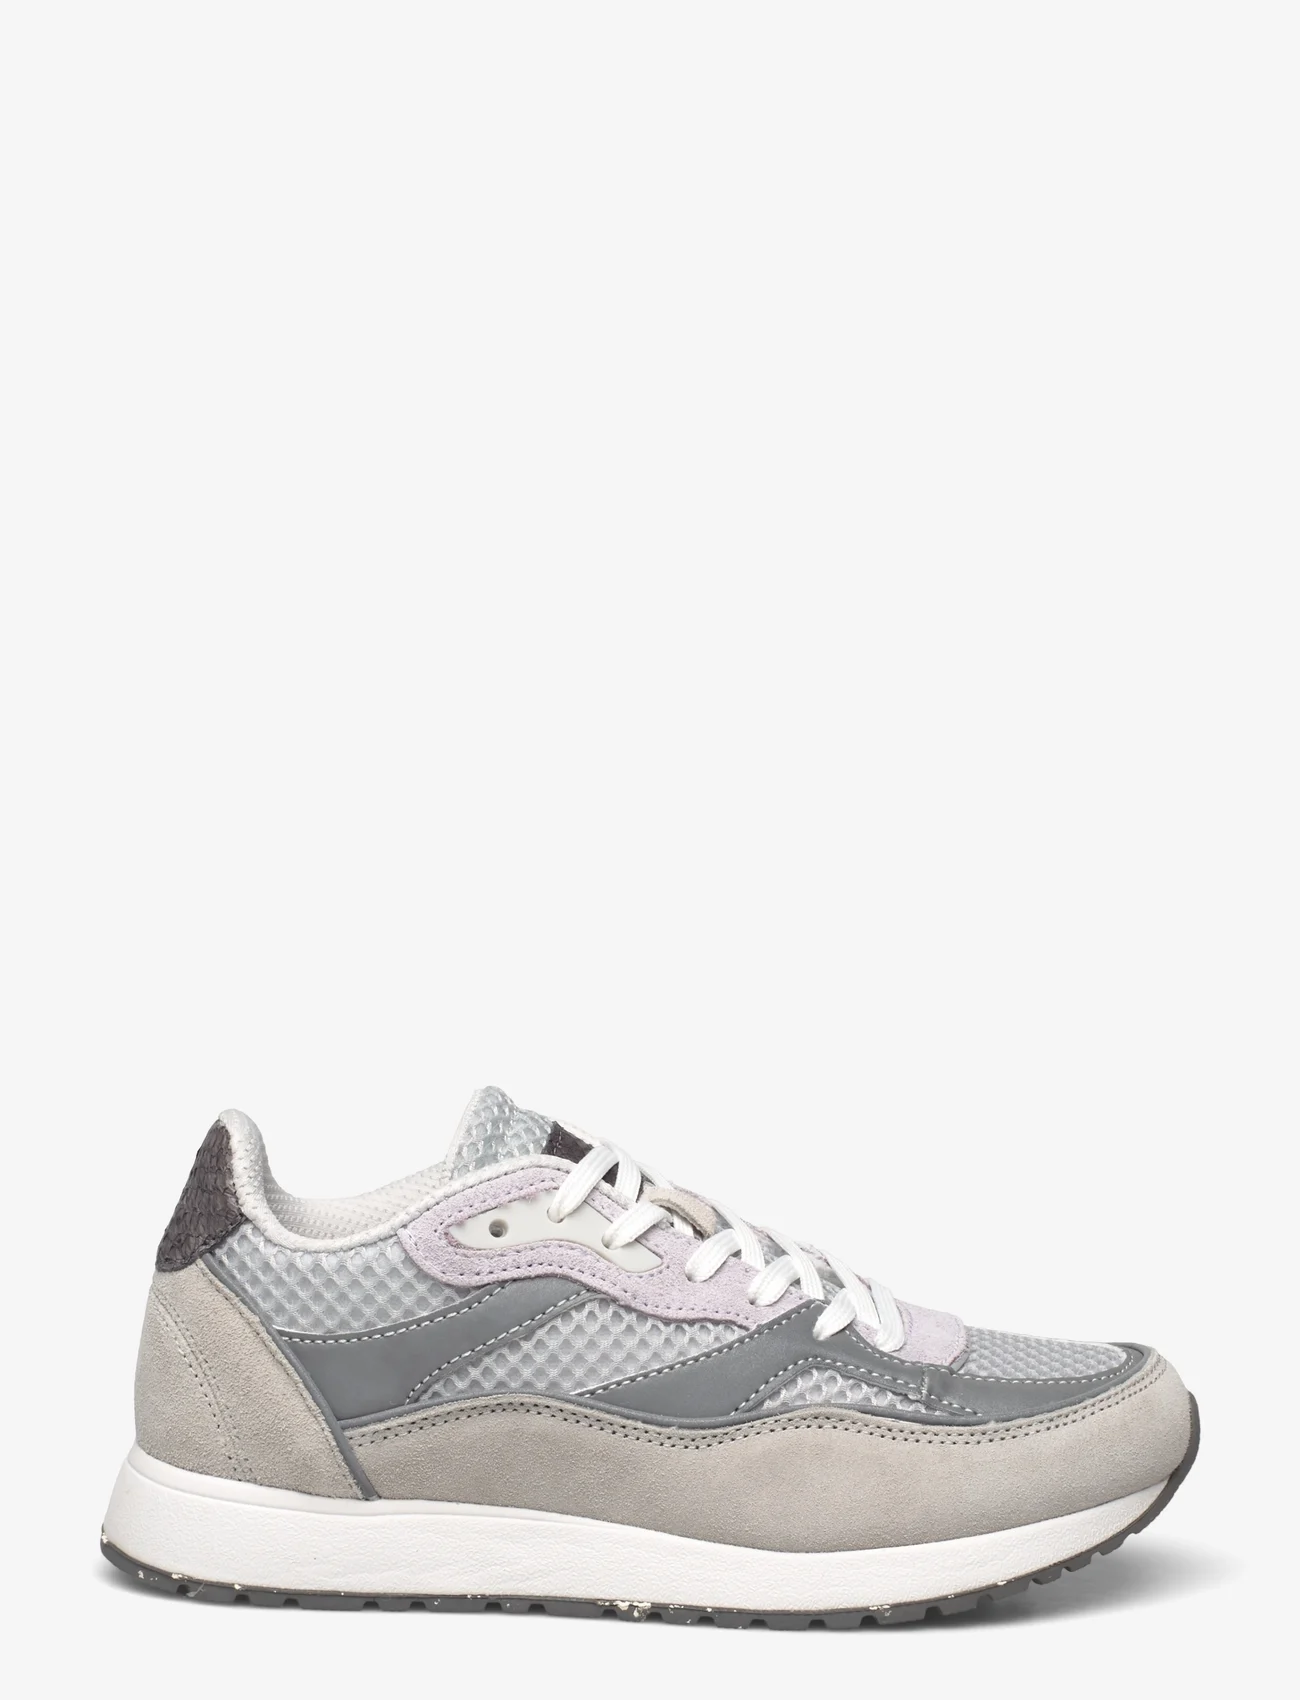 WODEN - Hailey - low top sneakers - oyster - 1